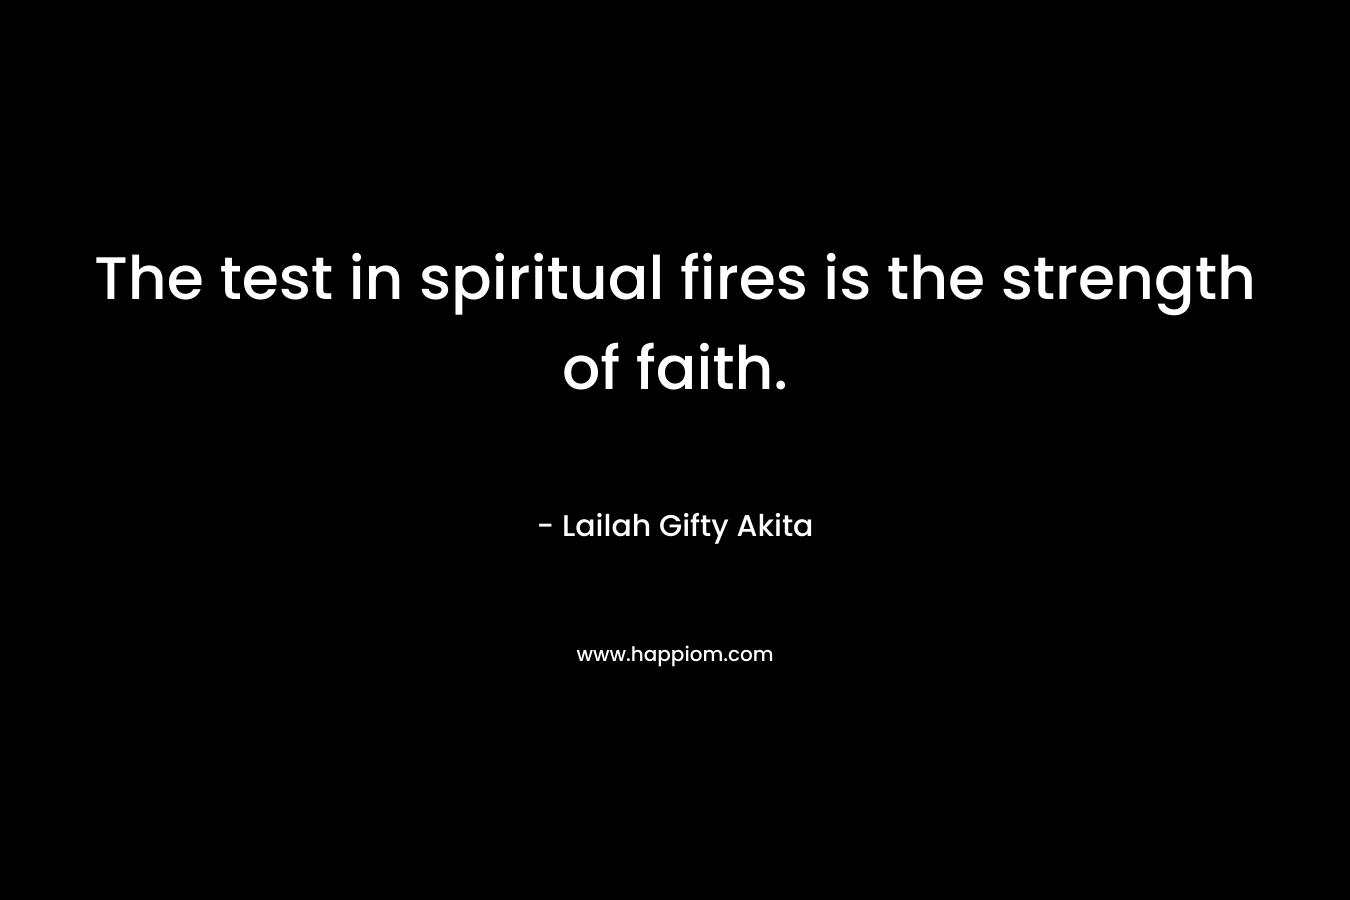 The test in spiritual fires is the strength of faith.